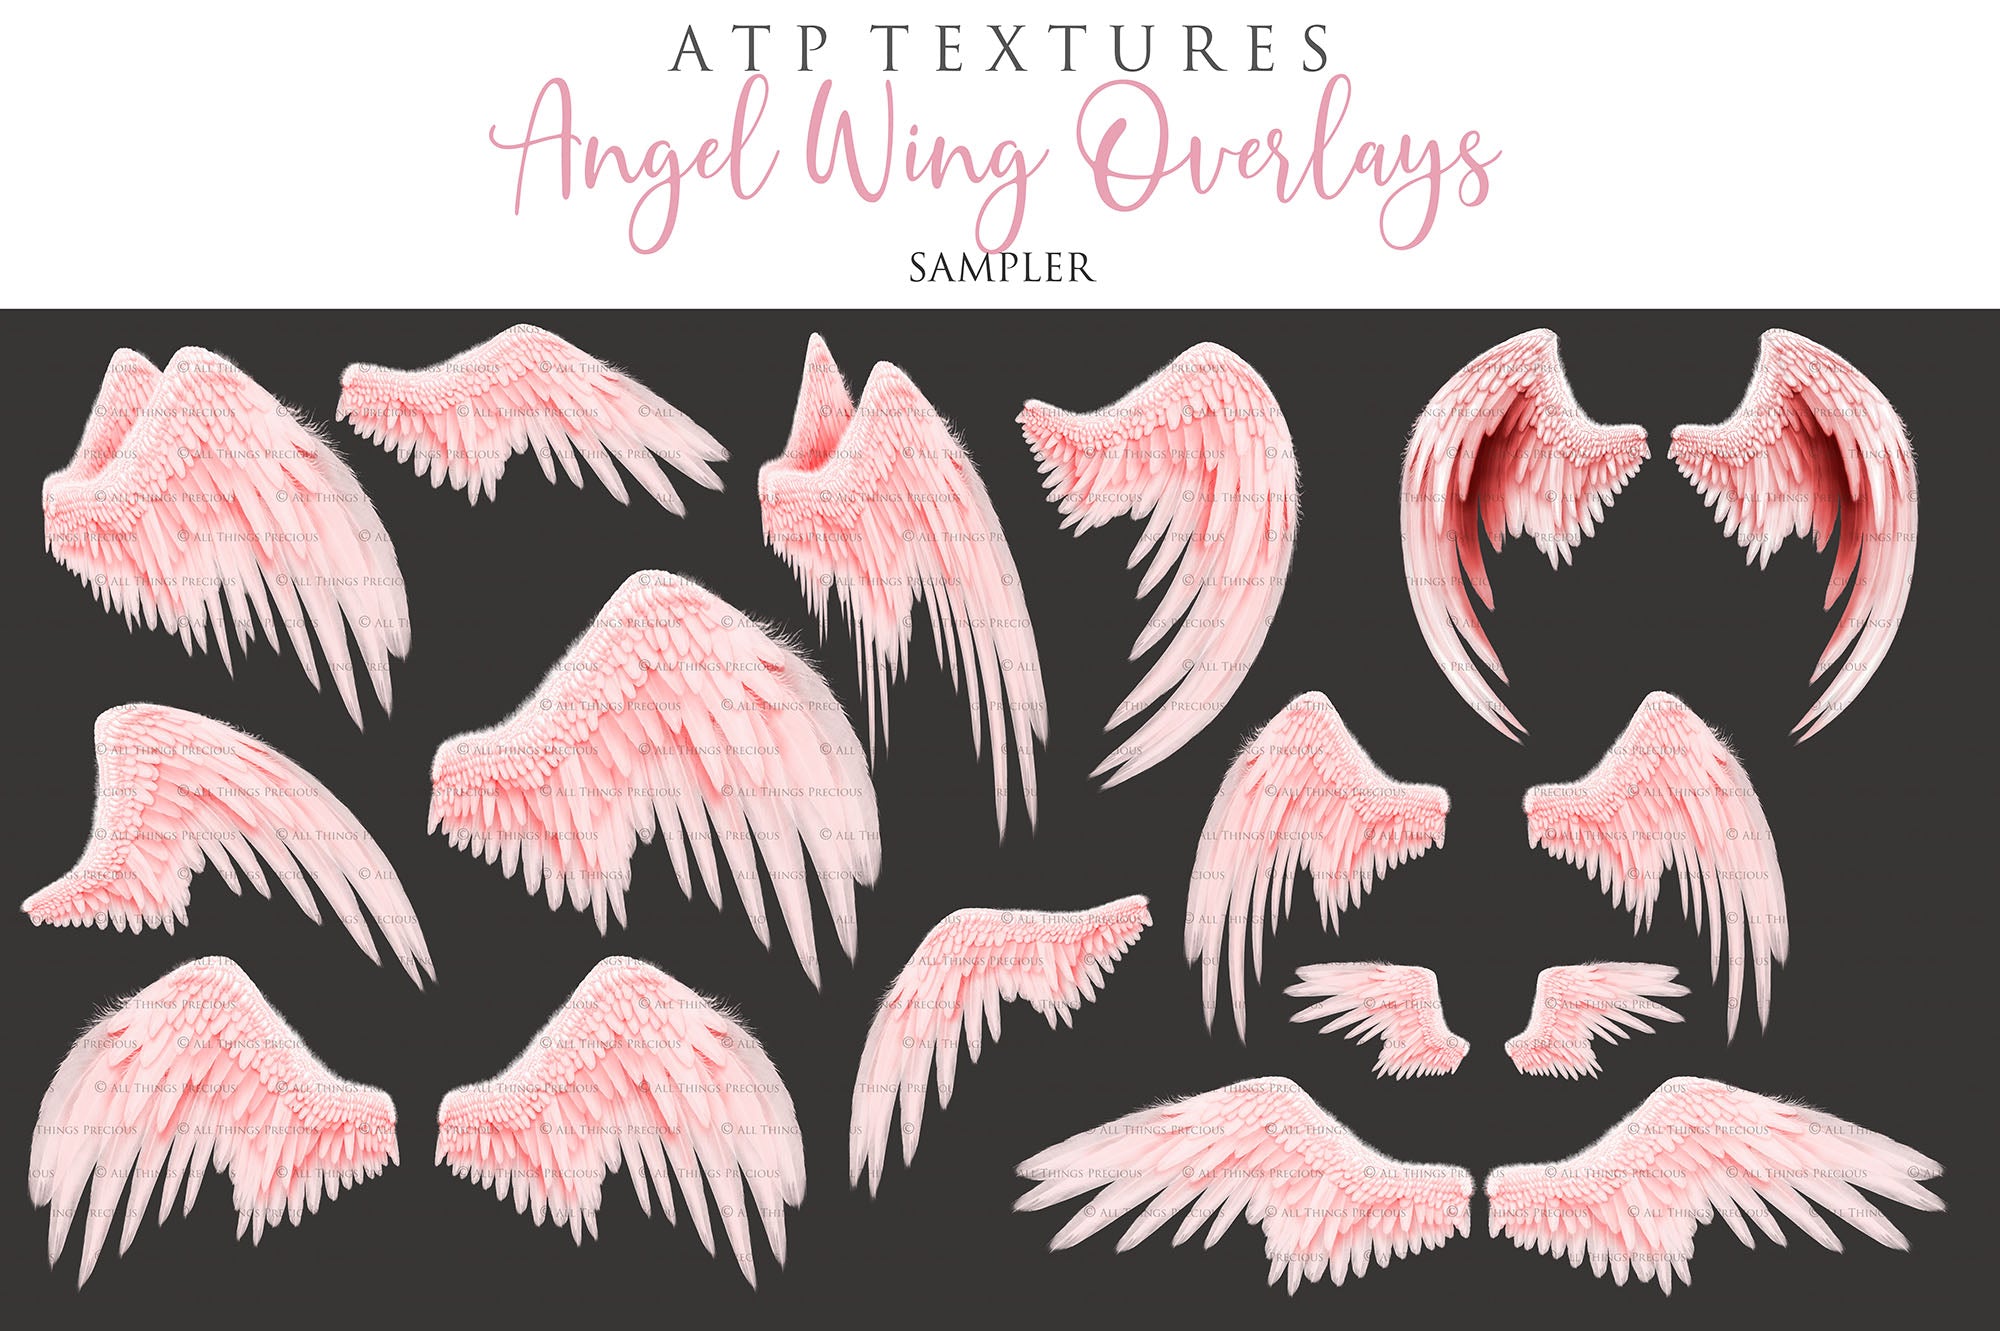 Png clipart, Angel Wings, Digital Overlays, Fine Art, Photography, Photoshop edits, Digital Art, Angel wing overlays, High resolution, Angel Clipart, Wing Clipart by ATP textures.